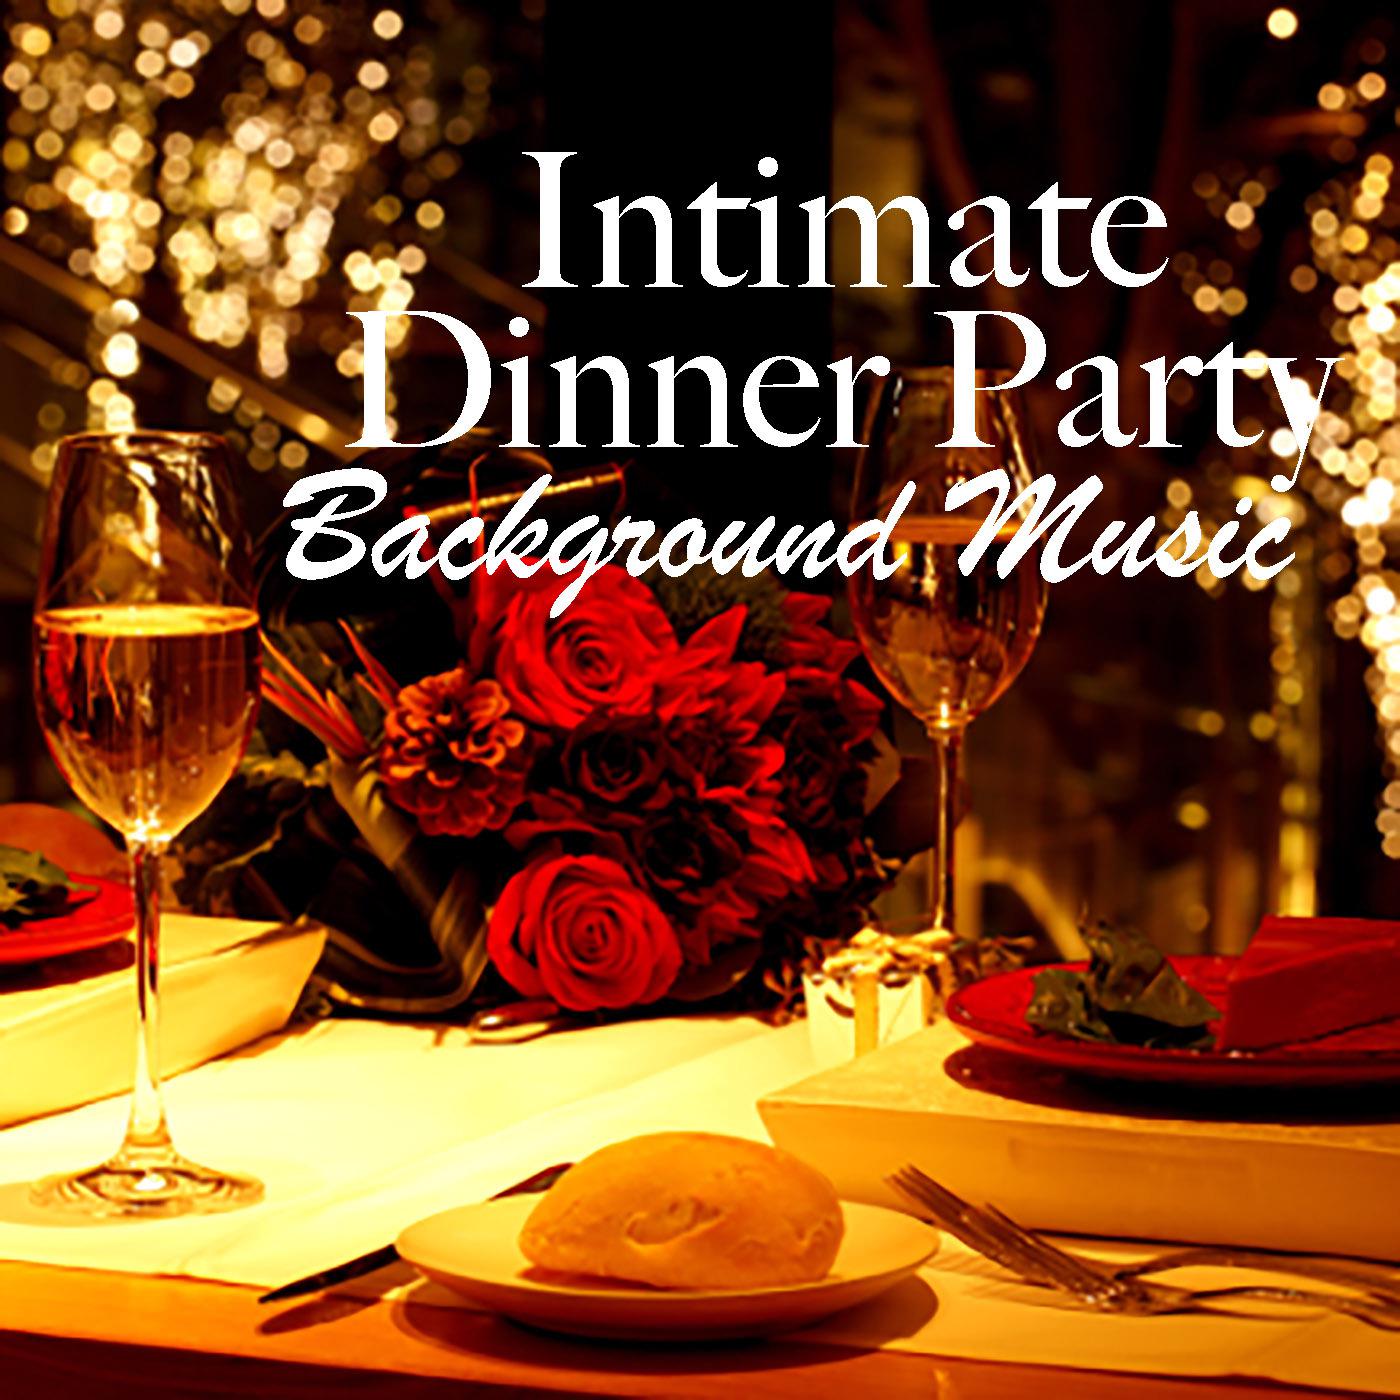 Intimate Dinner Party Background Music